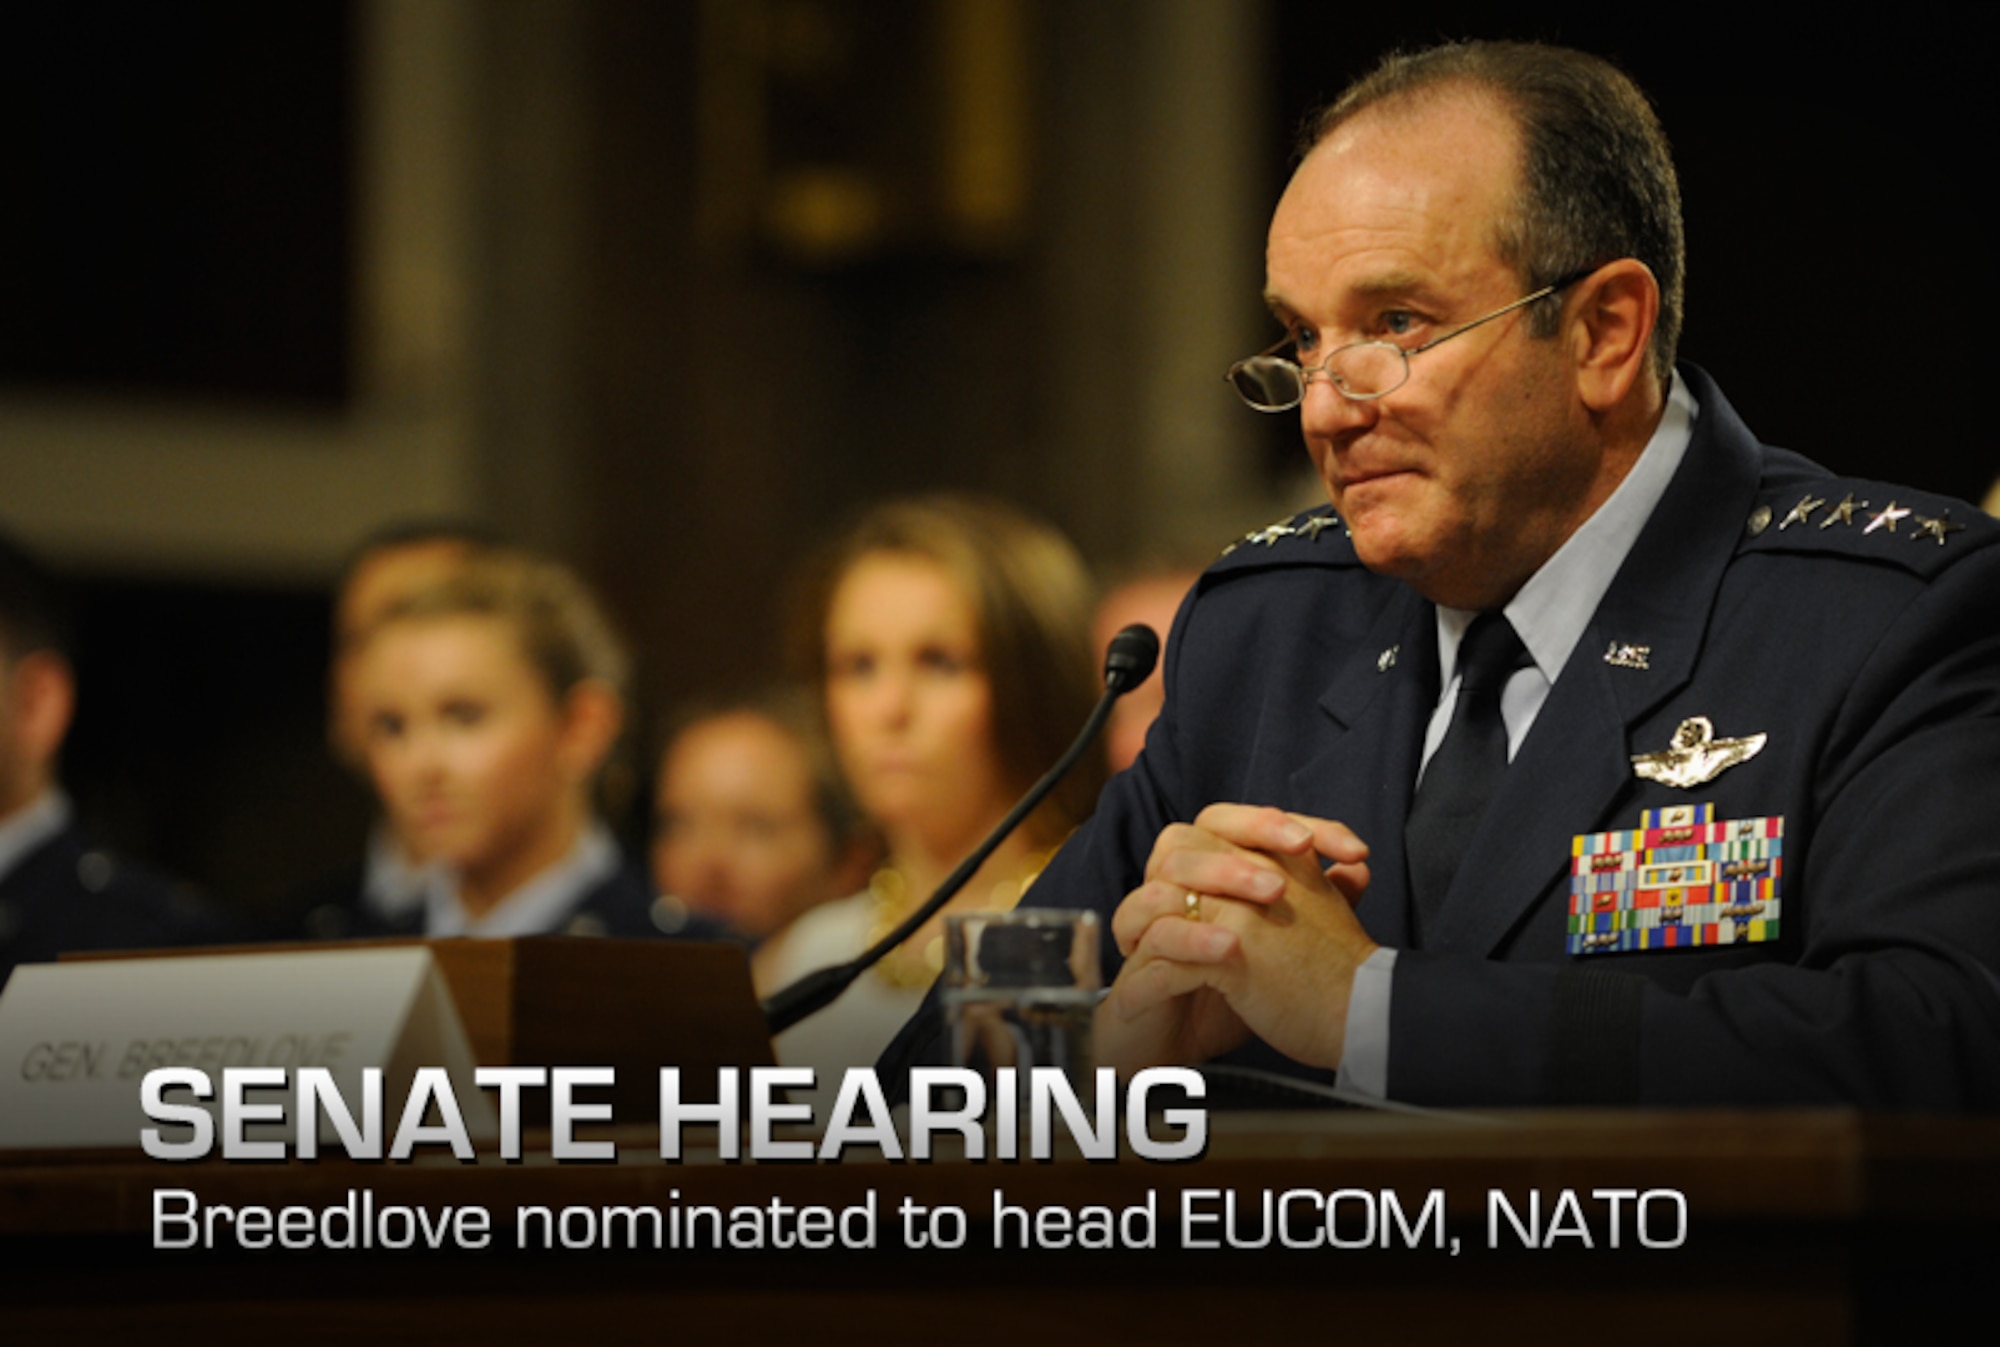 Gen. Philip Breedlove testifies to the members of the Senate Armed Services
Committee, on his nomination to be U.S. European Command commander and to be
the Supreme Allied Commander Europe April 11, 2013, in Washington, D.C.
Breedlove is presently the commander of U.S. Air Forces in Europe; commander
of U.S. Air Forces in Africa; commander of the Air Component Command at
Ramstein Air Base, Germany; and the director of the Joint Air Power
Competency Center at Ramstein AB. (U.S. Air Force photo/Senior Airman Carlin
Leslie)